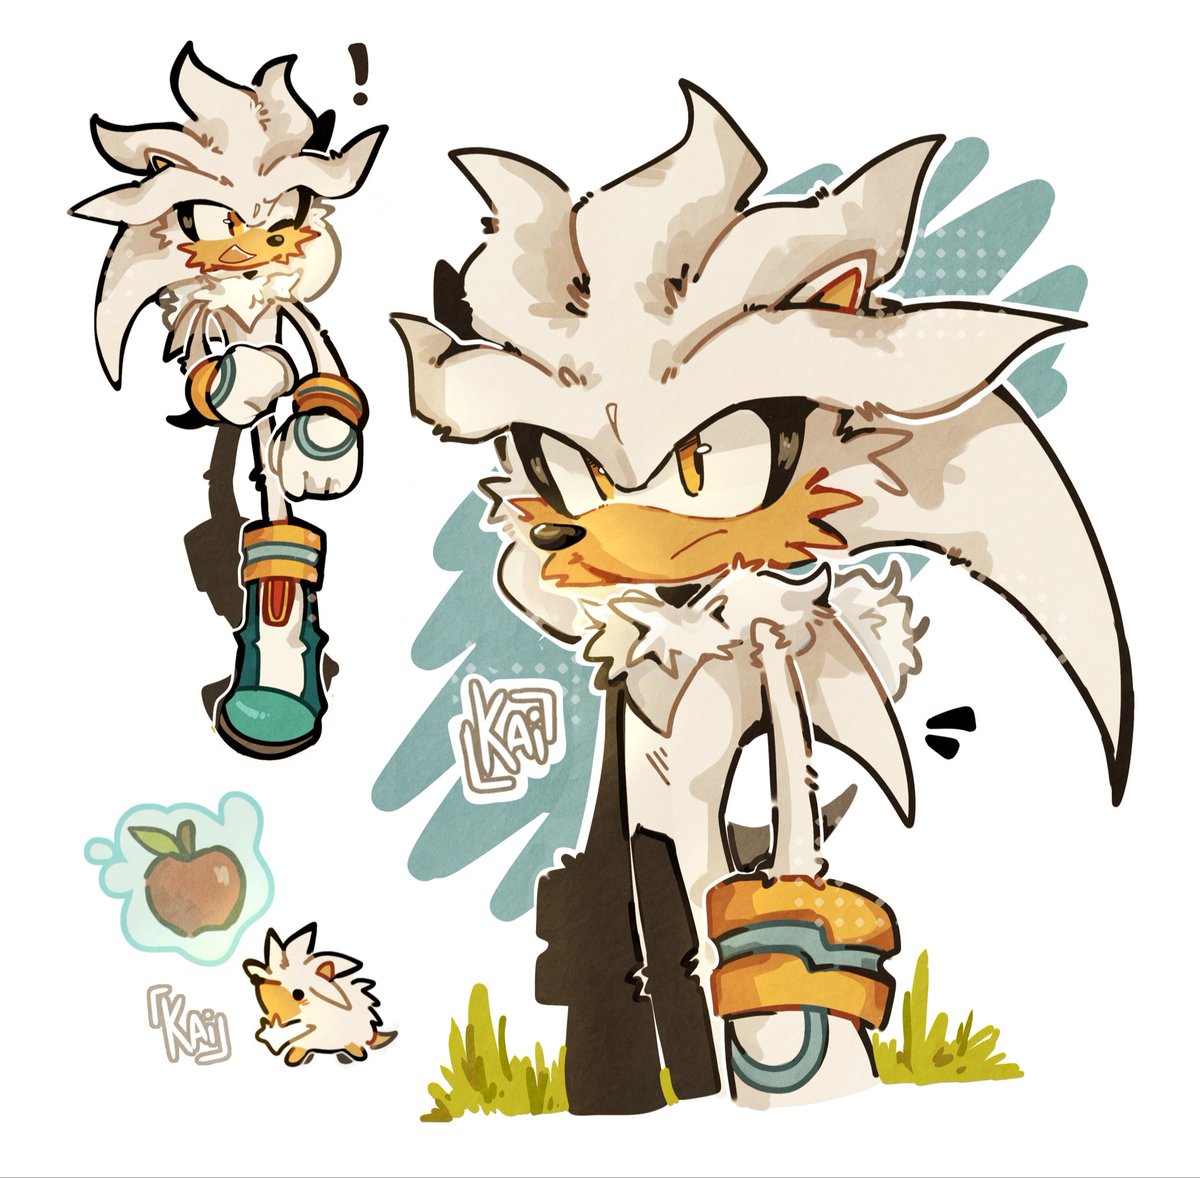 Some quick Silver drawings 🧍❗

#SilverTheHedgehog  #SonicTheHedgehog #SonicFanart #SonicArt #SilverTheHedgehogFanart